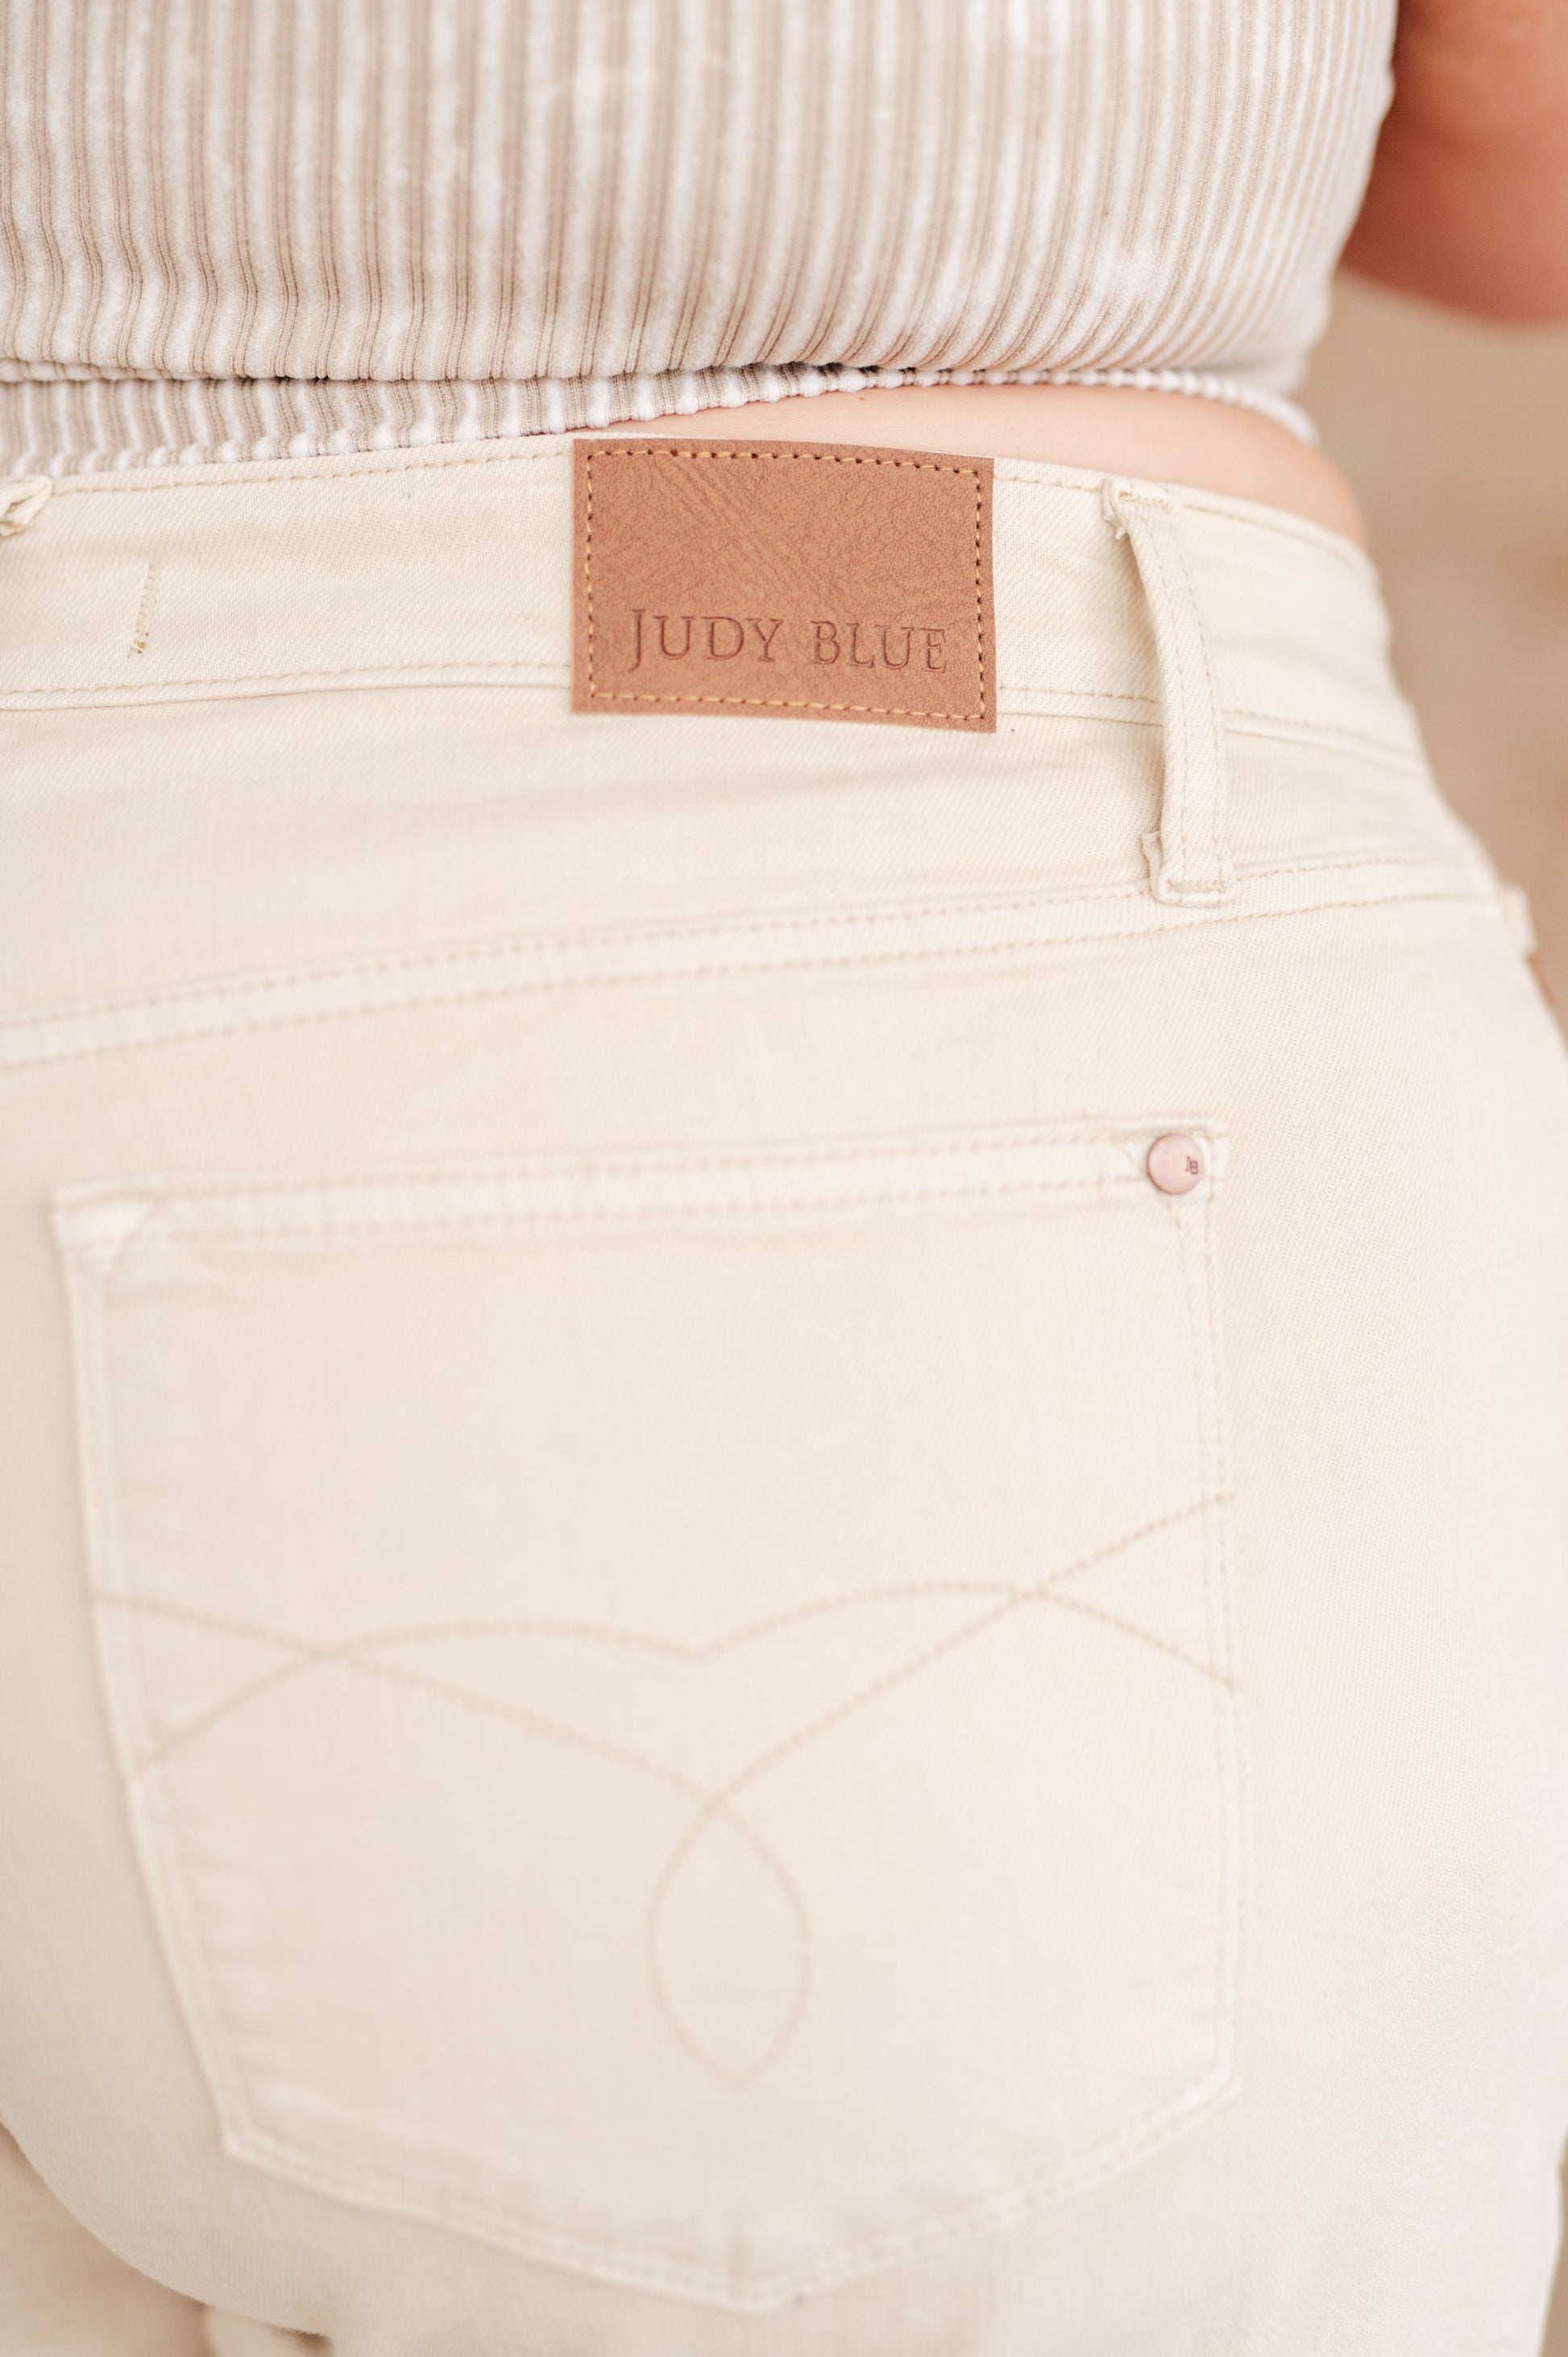 Elevate your summer style with Greta High Rise Garment Dyed Shorts from Judy Blue! Featuring a high rise fit and a non-distressed bone khaki color, these shorts are an elevated update on a classic denim look. Perfect for any occasion, these shorts will keep you looking stylish and feeling confident. S - 3X